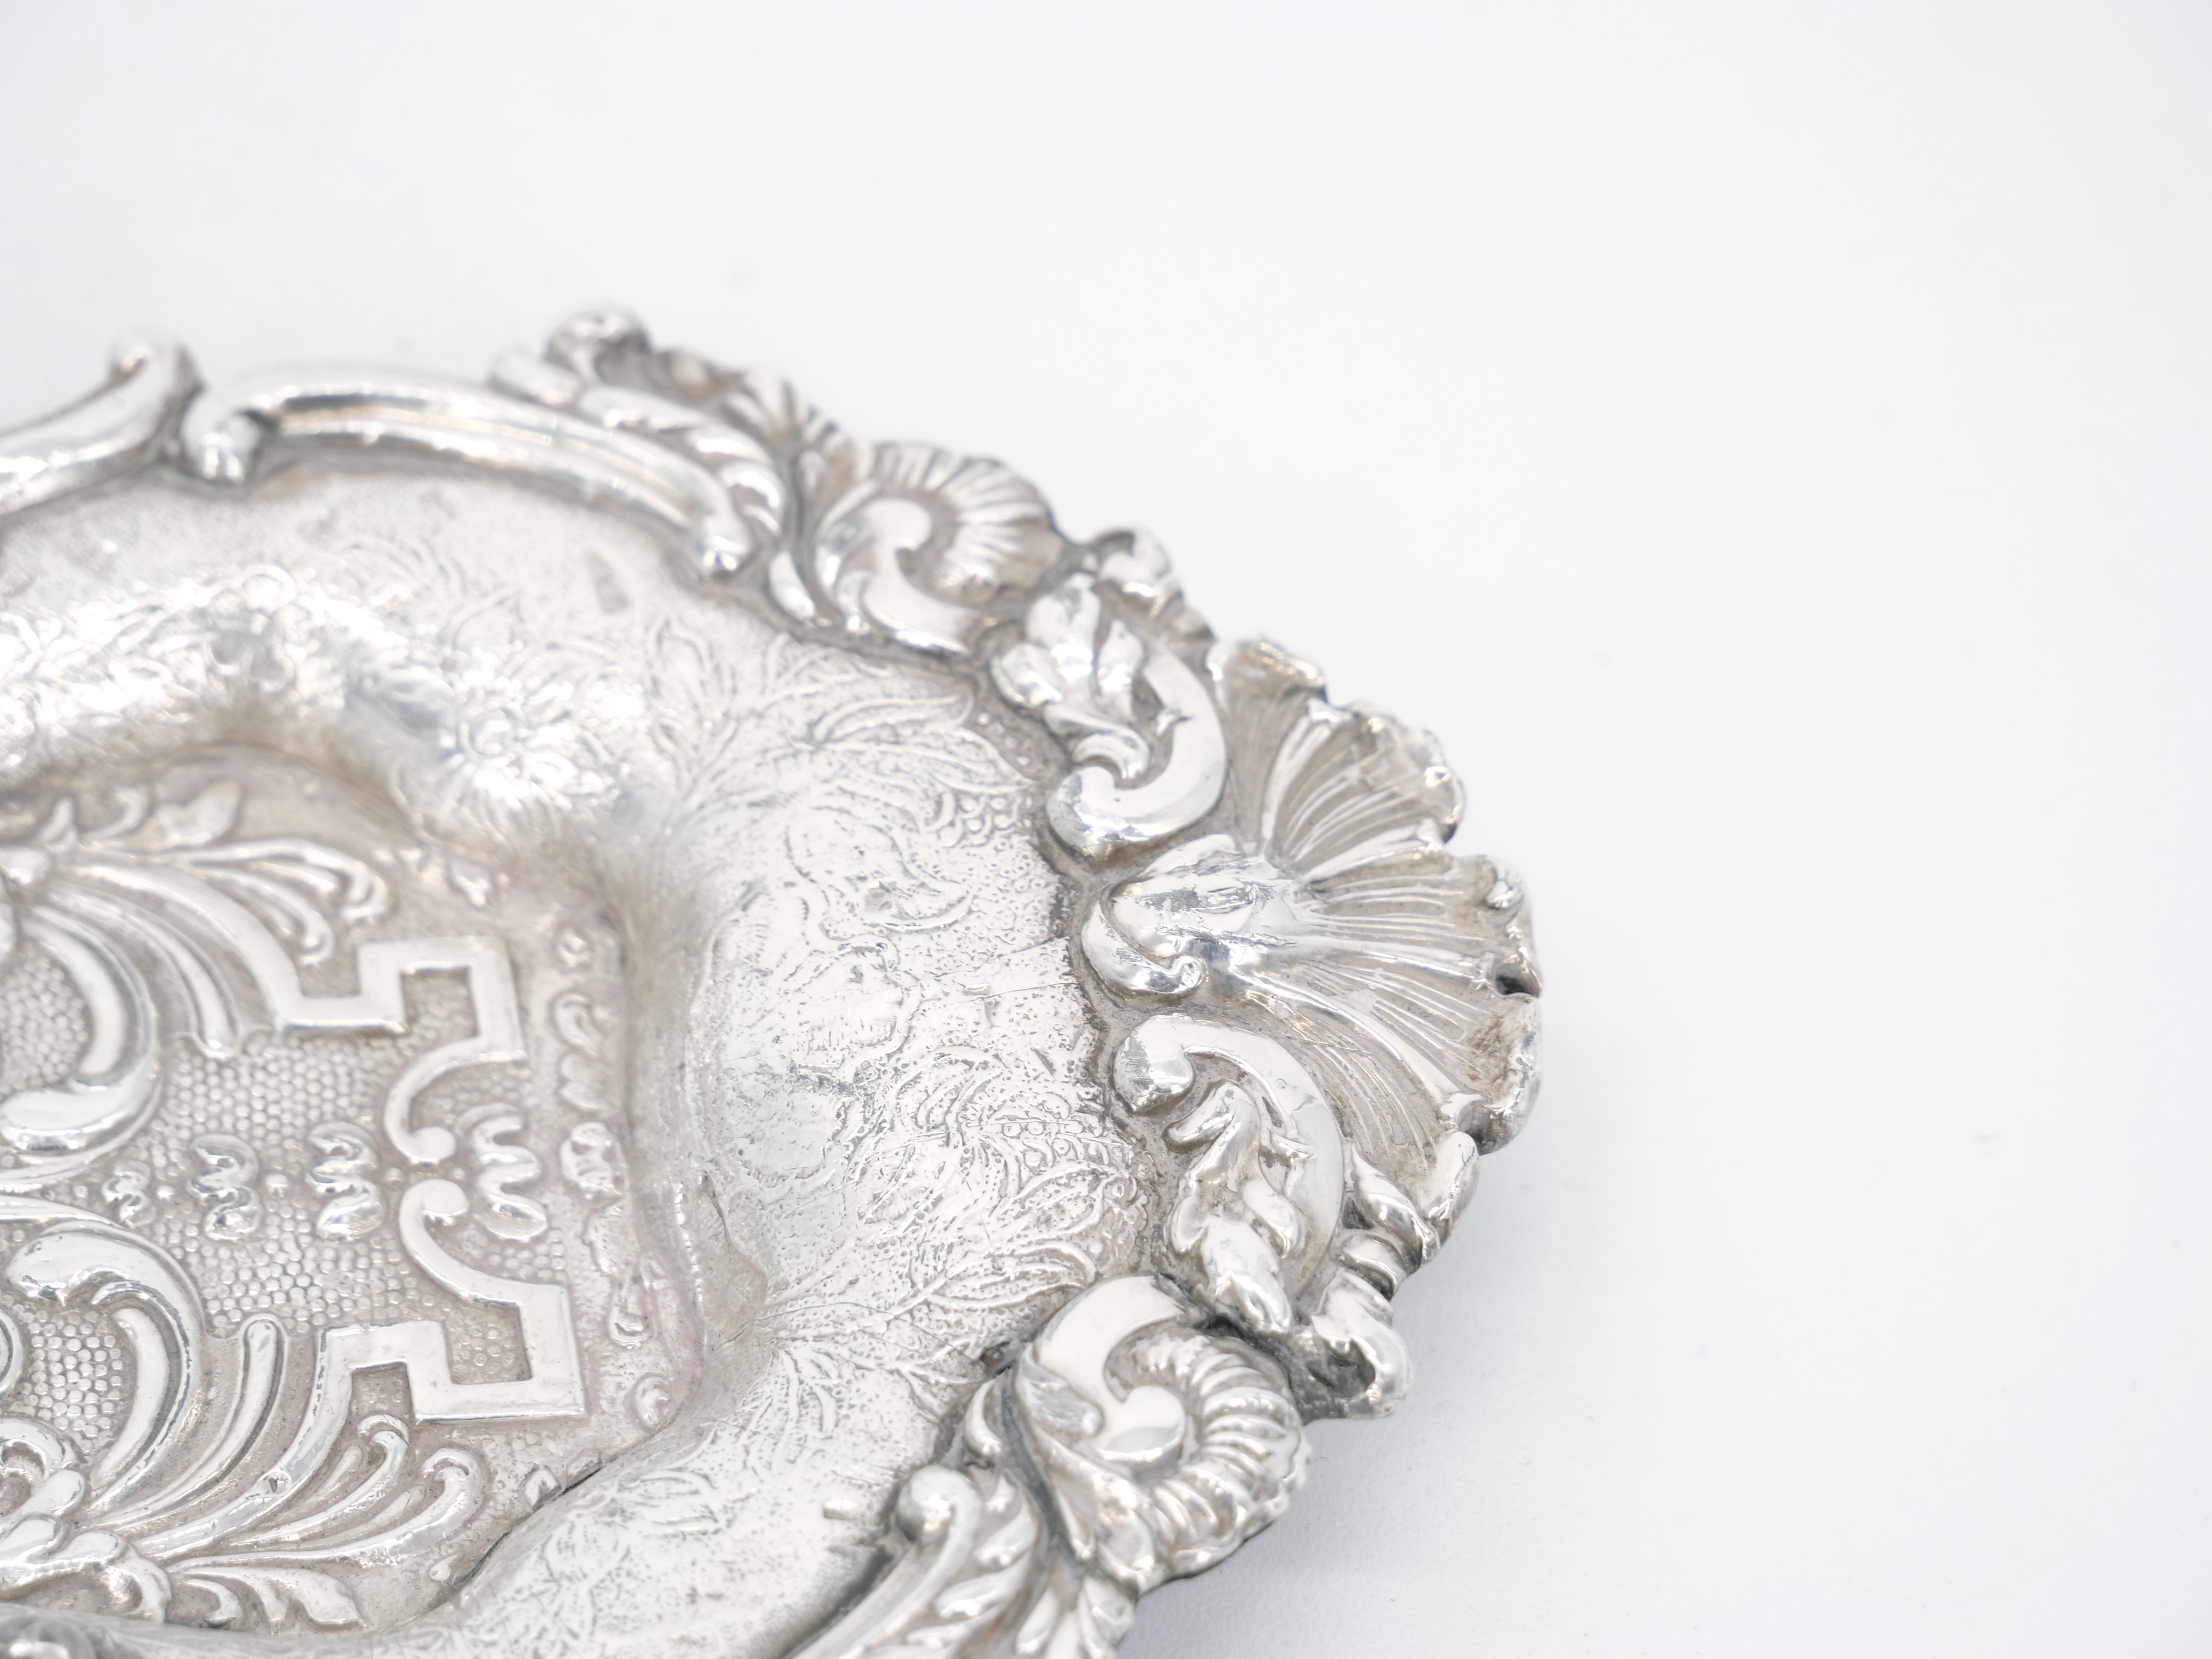 Old English Sheffield Silver Plate Snuffer Tray / Engraved Interior For Sale 3